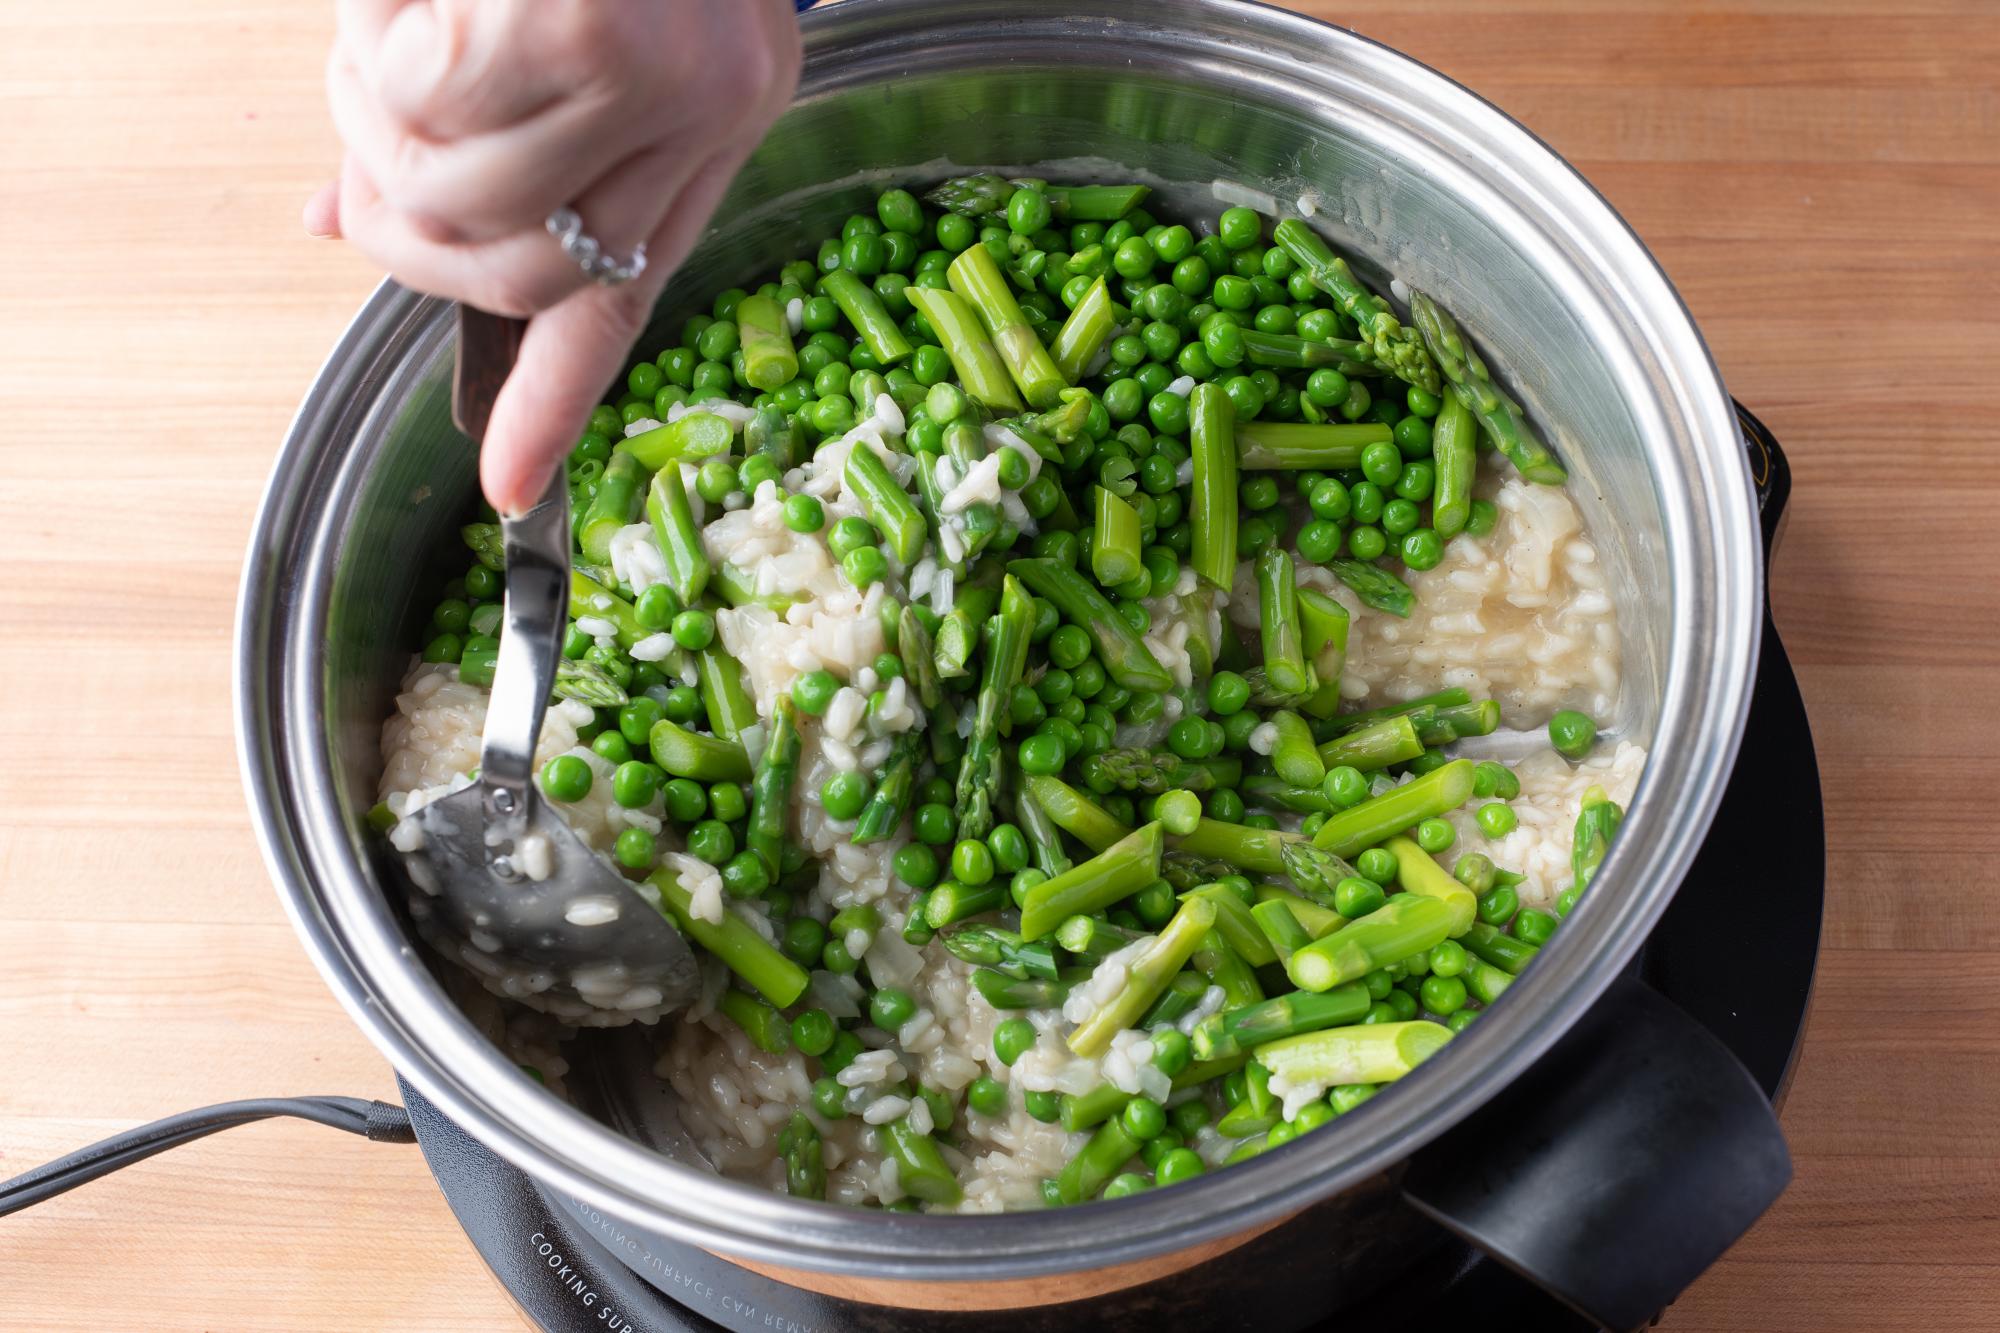 Adding in the peas and beans.